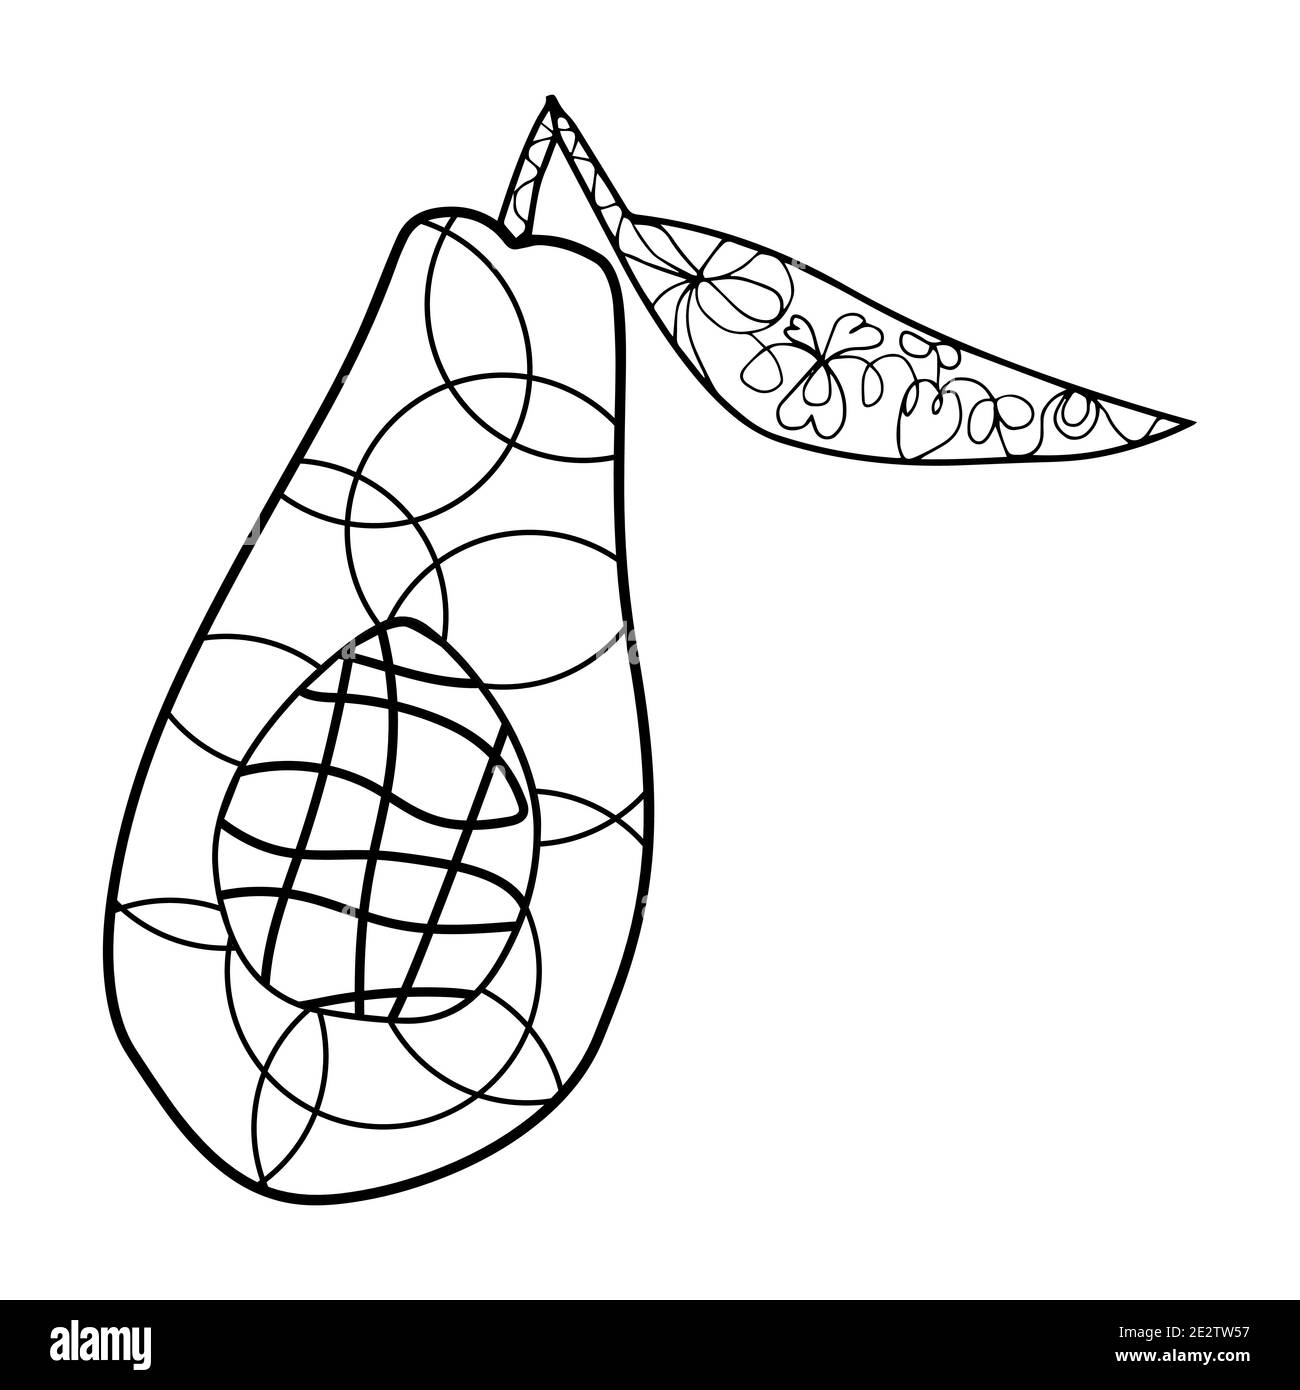 an avocado cut in half with doodle ornaments on a white background coloring page Stock Vector